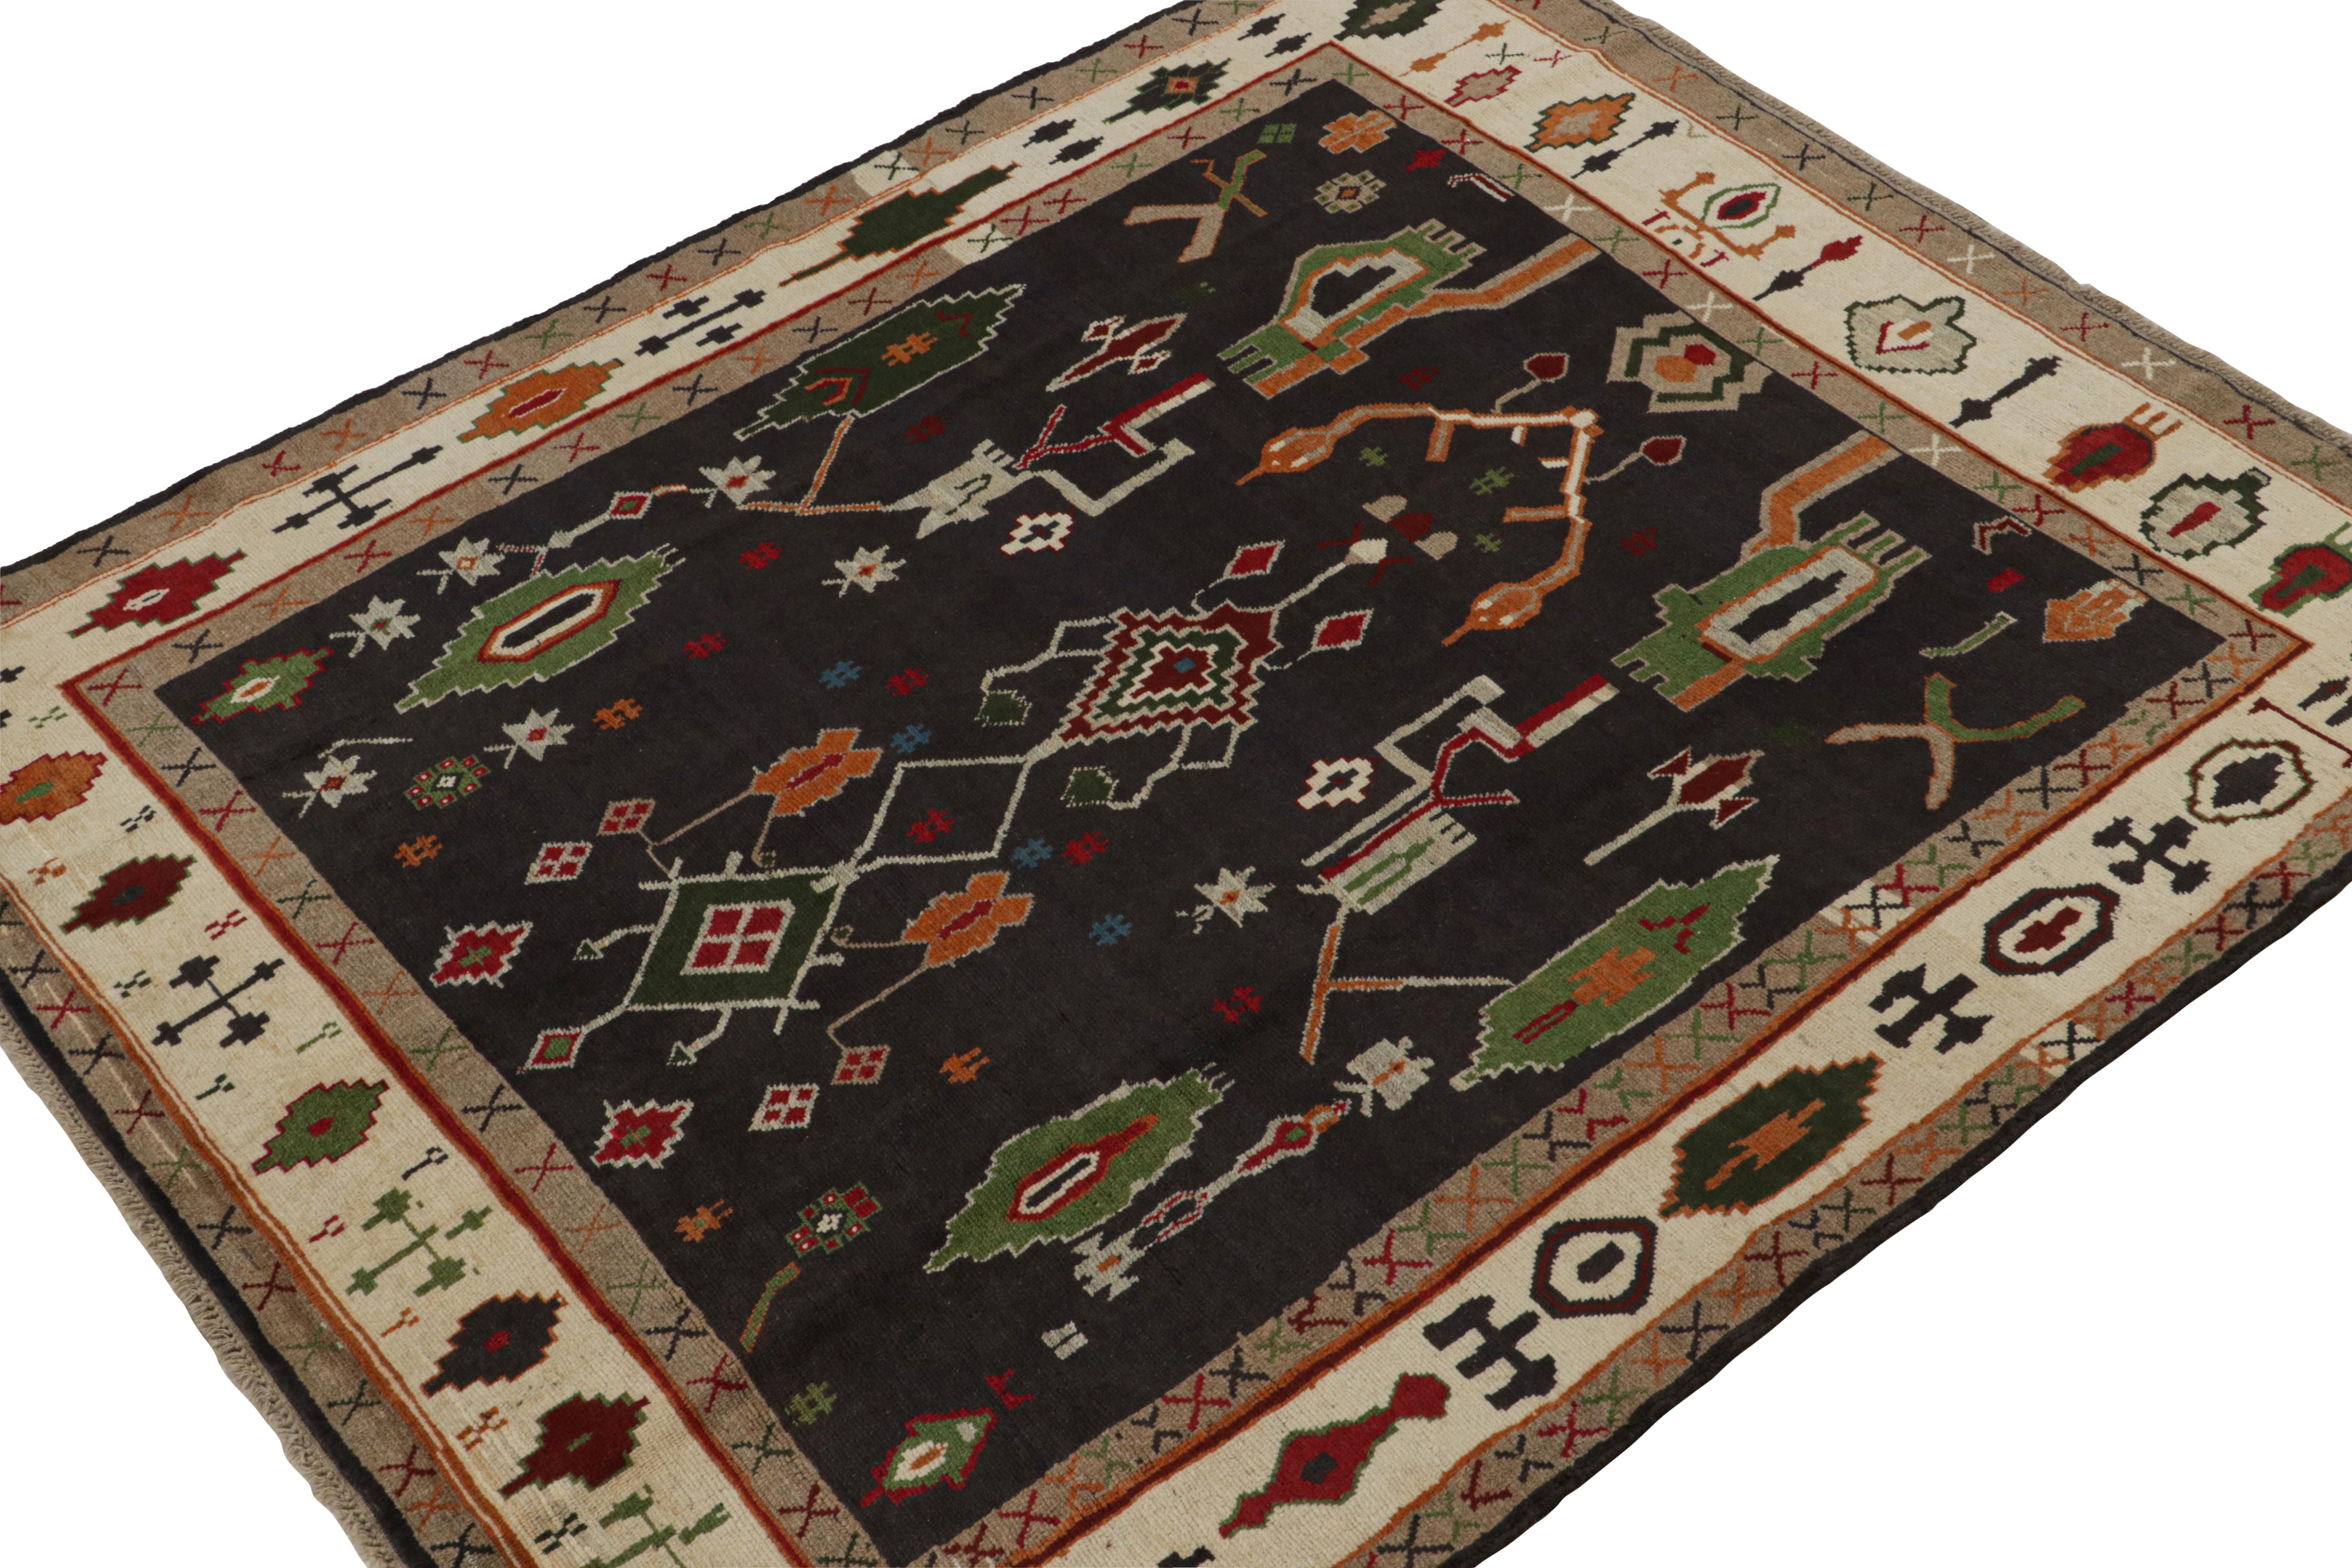 Hand-knotted in wool, this 7x9 rug is from the Modern Classics Collection by Rug & Kilim—inspired by antique Oushak rugs. 

On the Design:

This piece enjoys a bold approach to this style that plays more vibrant geometric patterns on a black